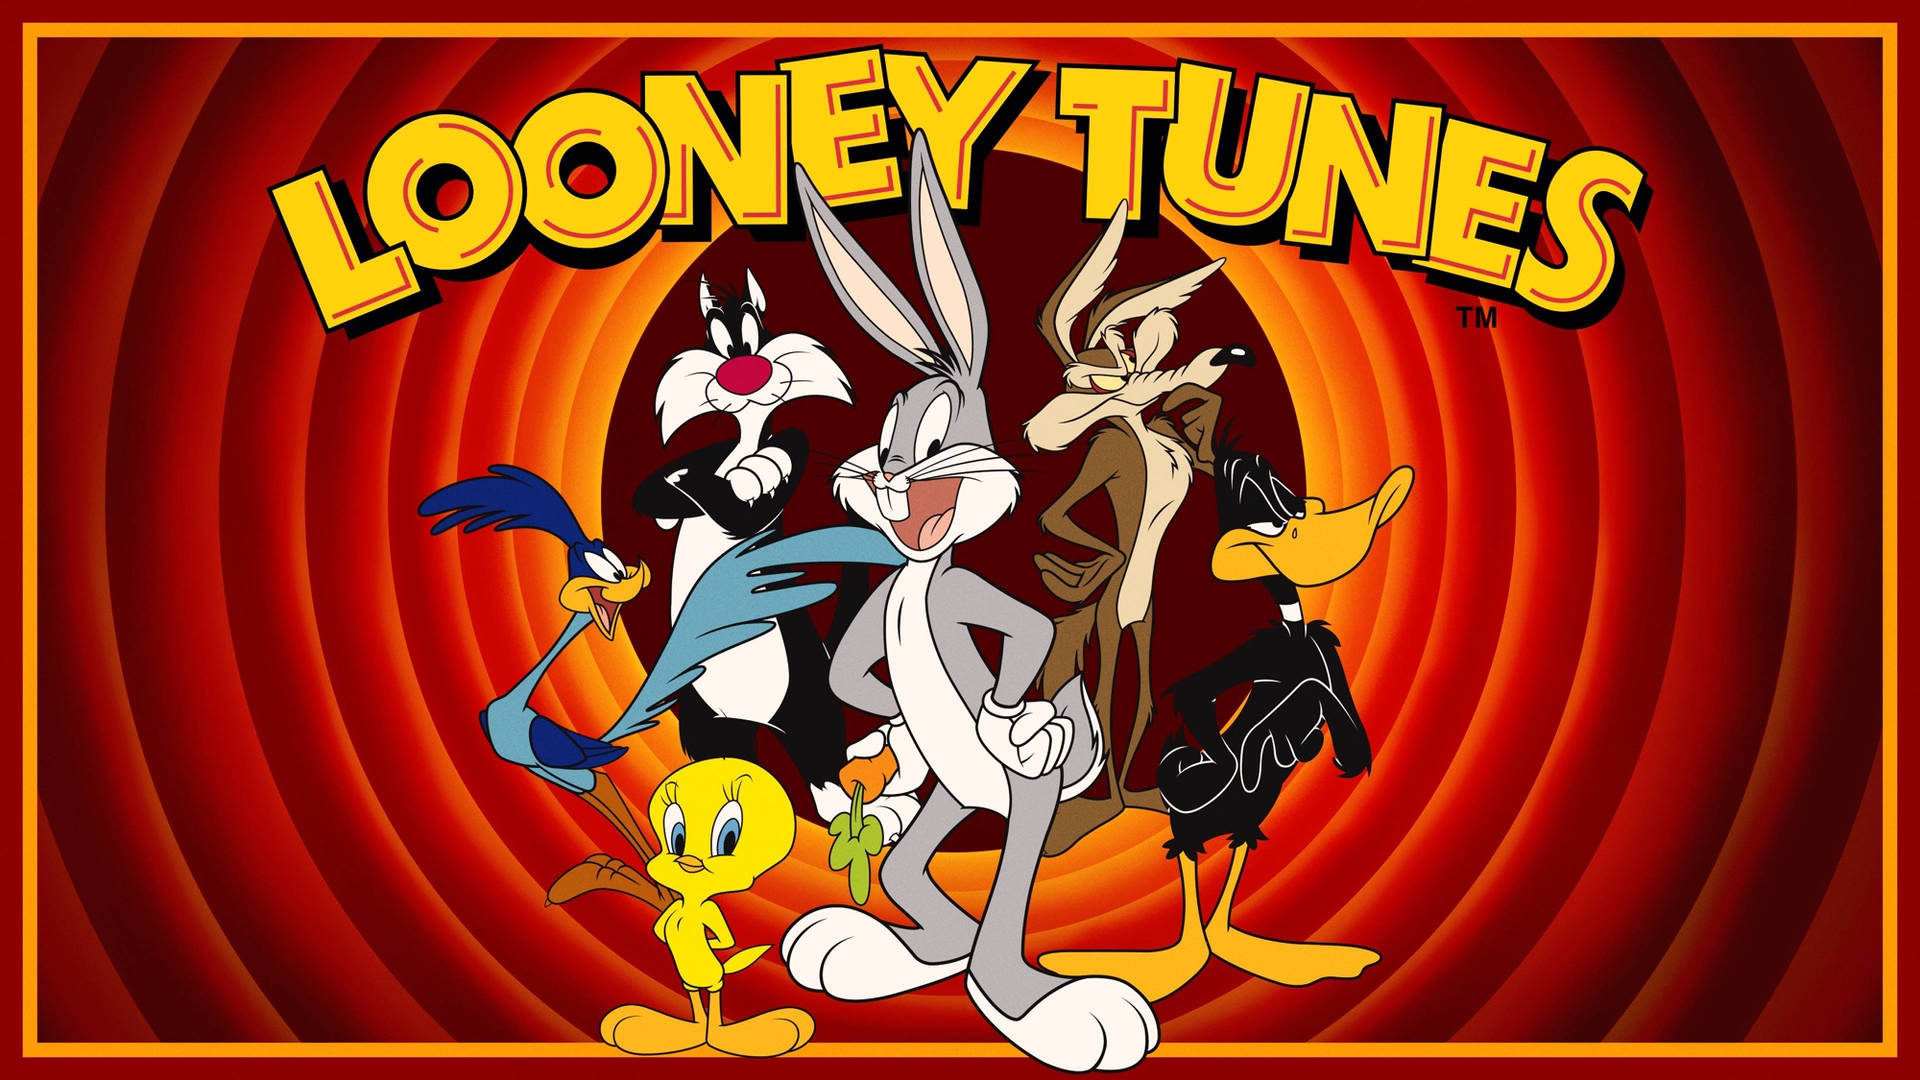 Wile E Coyote In Looney Tunes